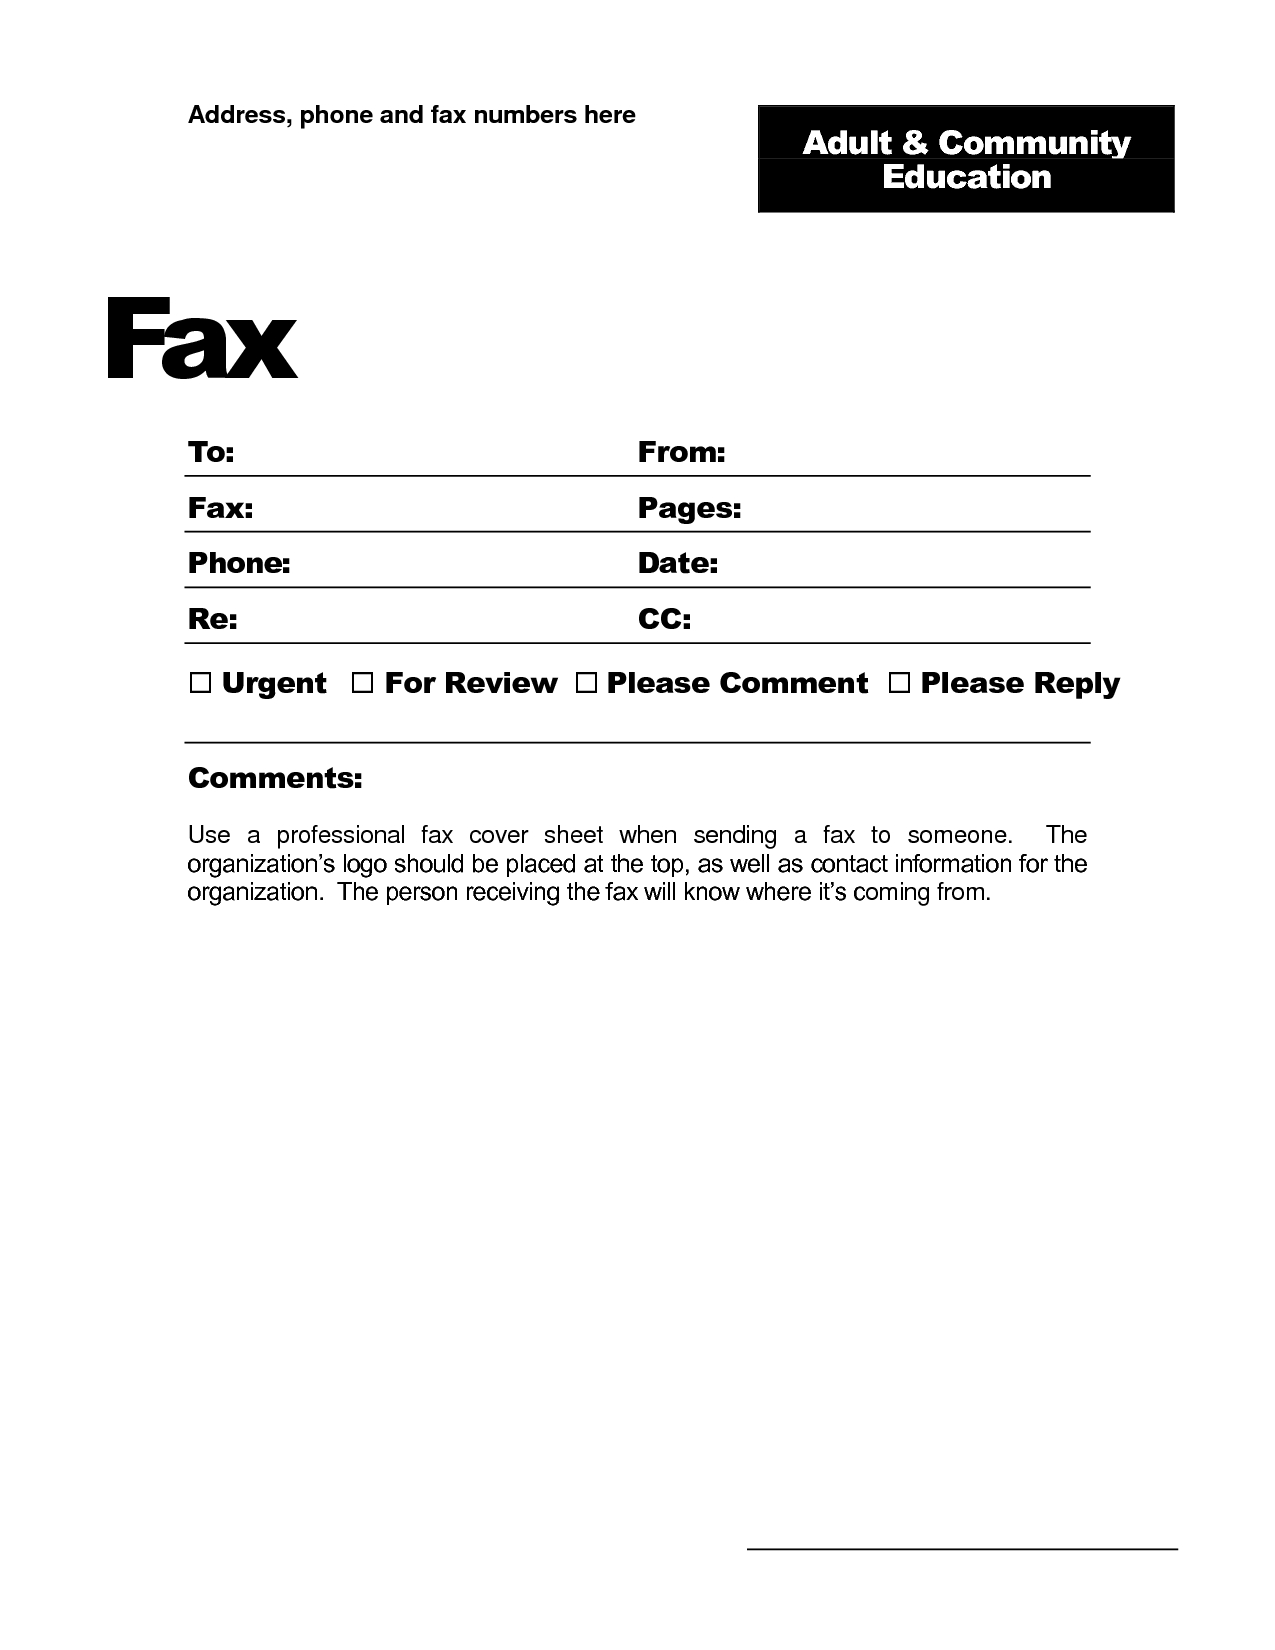 Fax Template Word 2010 - Free Download Inside Fax Template Word 2010